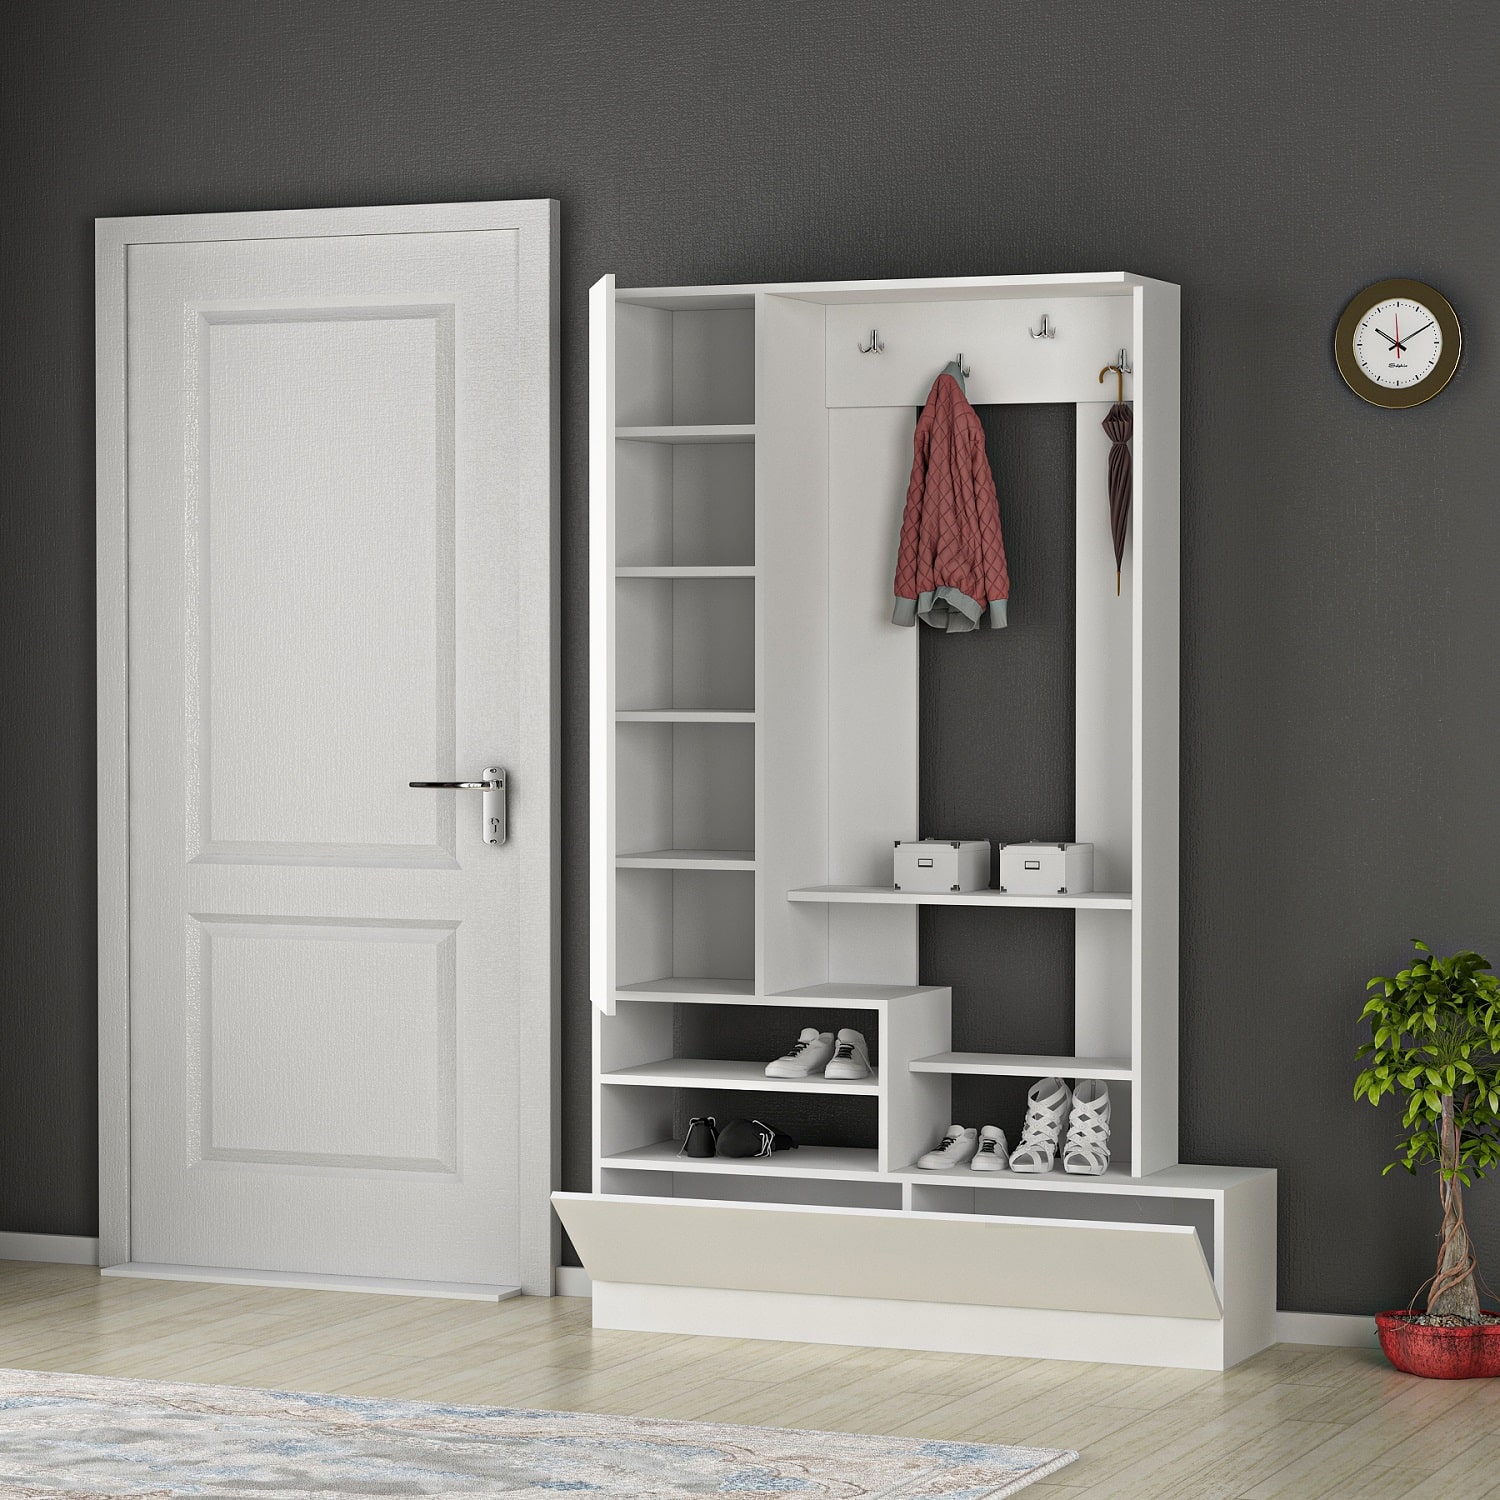 Seta Entryway - Furniture Rack Furniture Home Manufacturer White Garden and - Coat Cabinets with - Shelves Netsan 